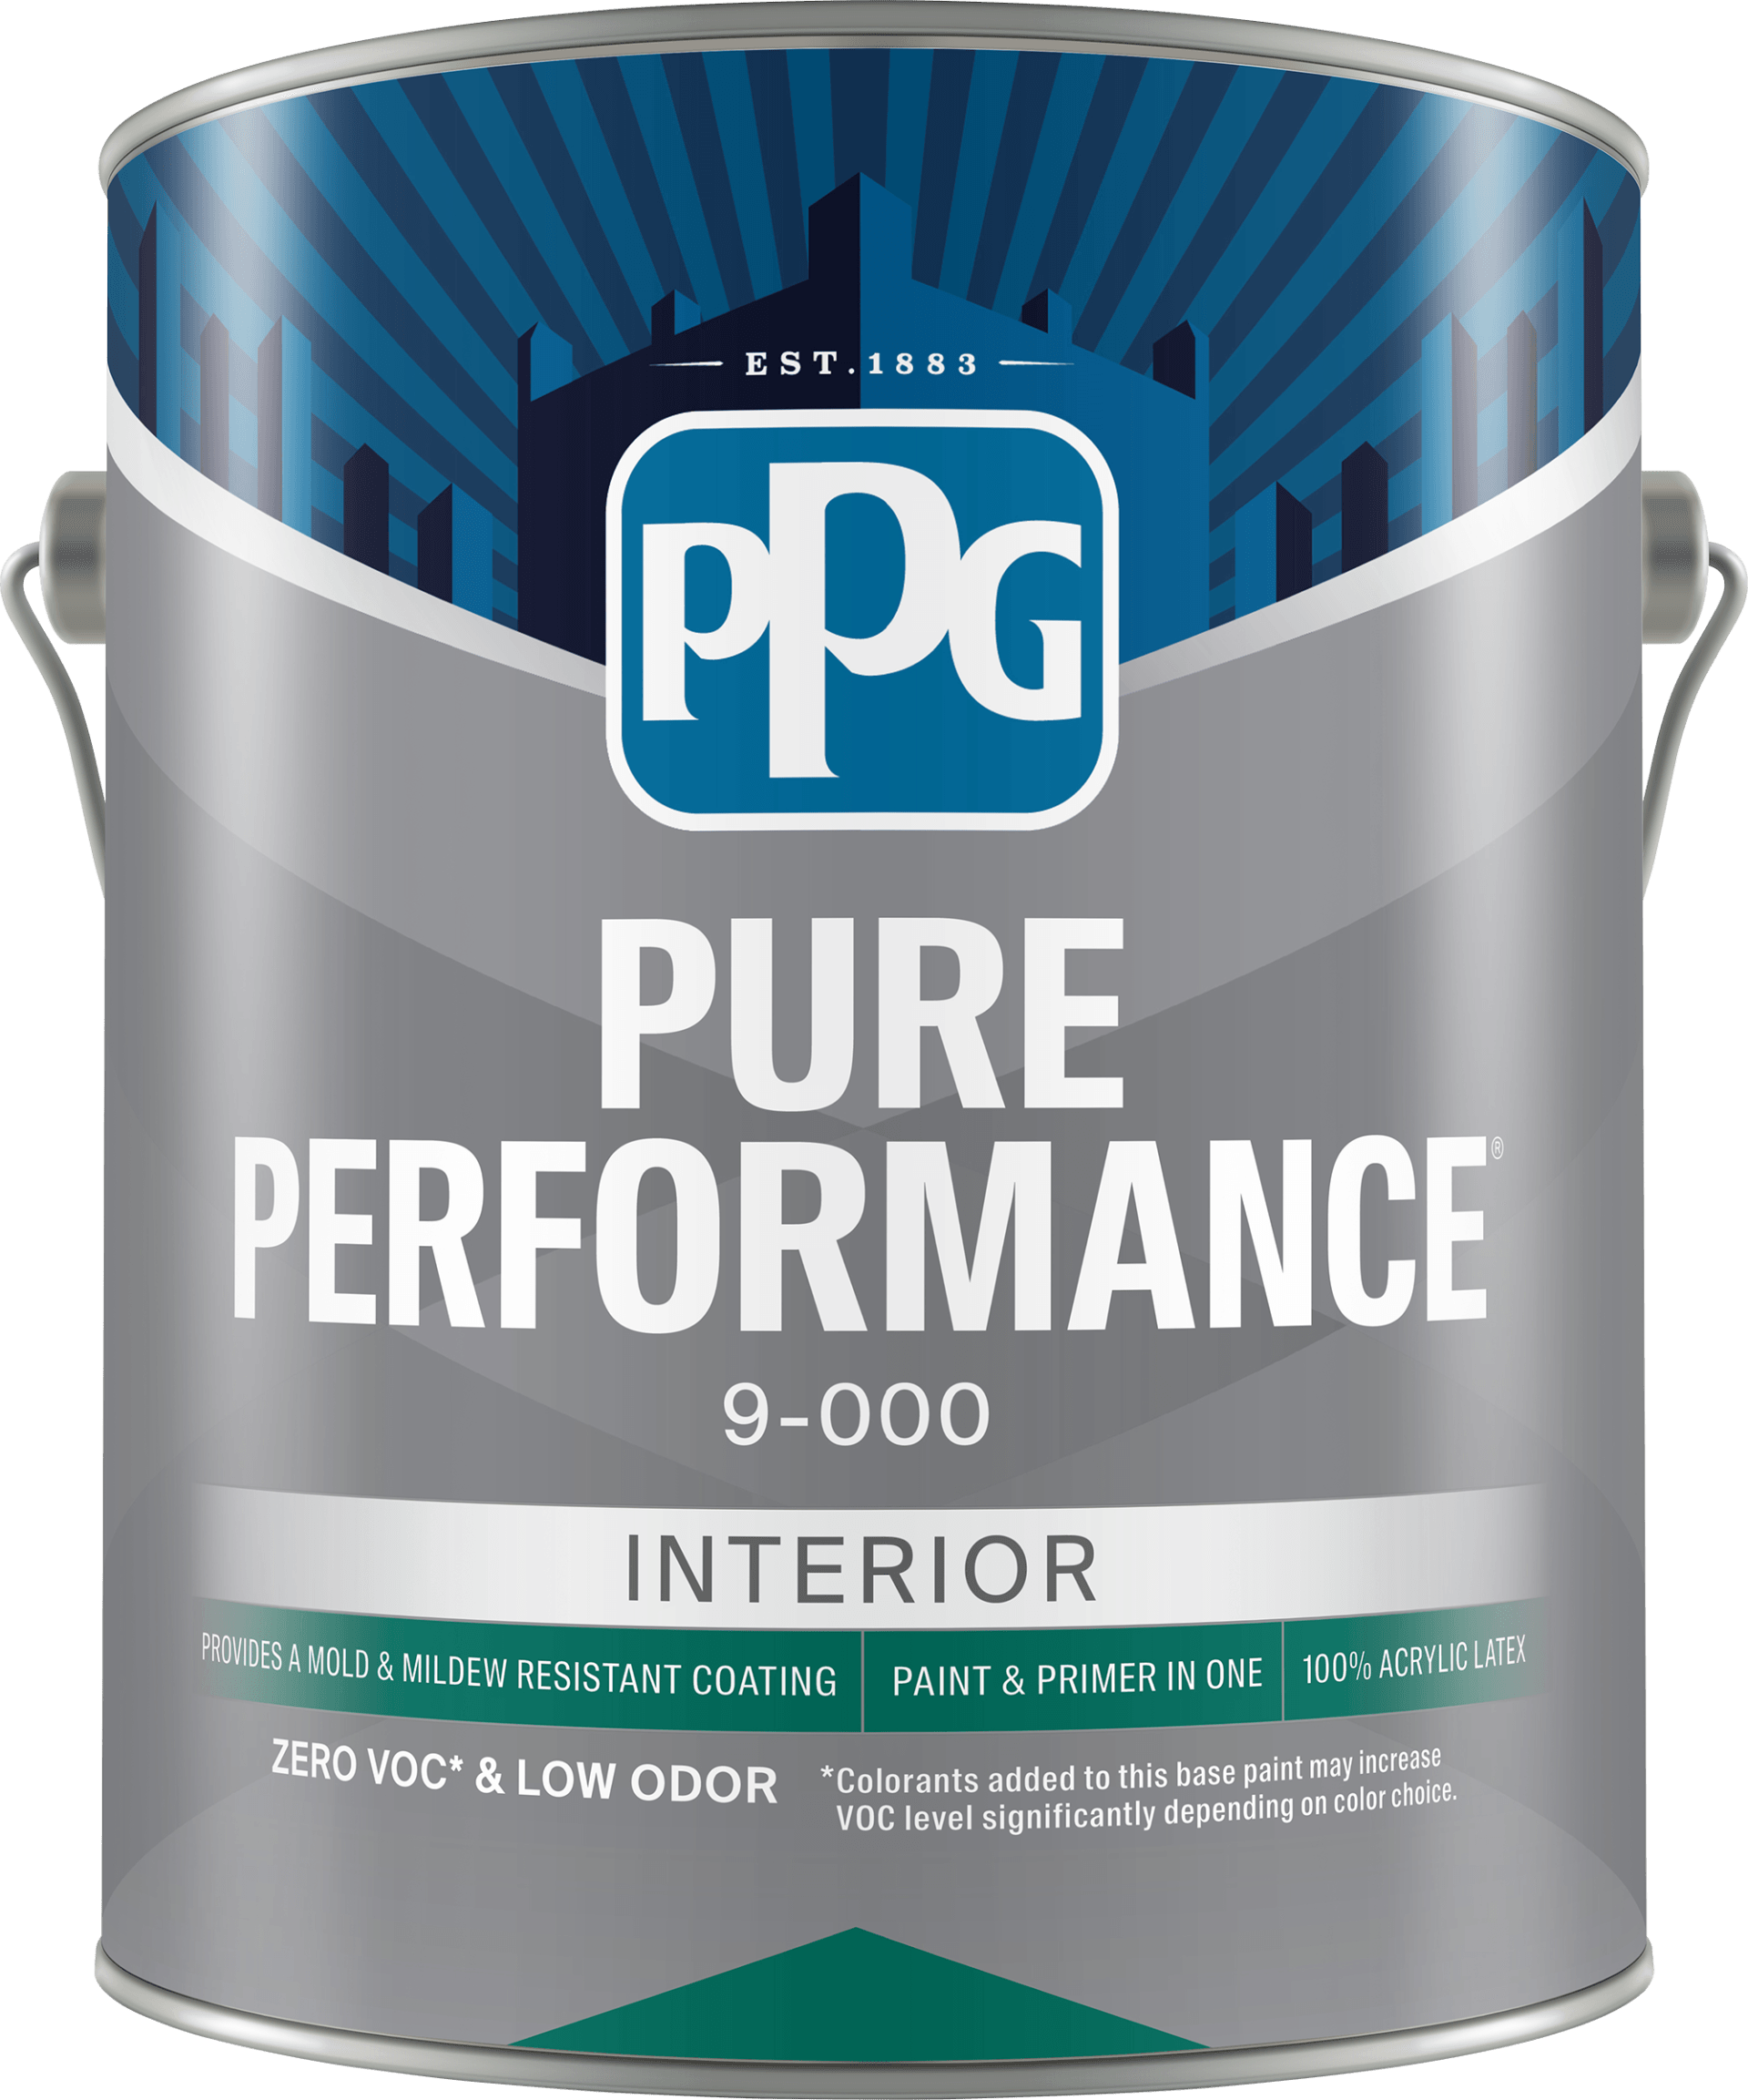 PURE PERFORMANCE® Paint & Primer in One Interior Latex from PPG near Holland, Ohio (OH)